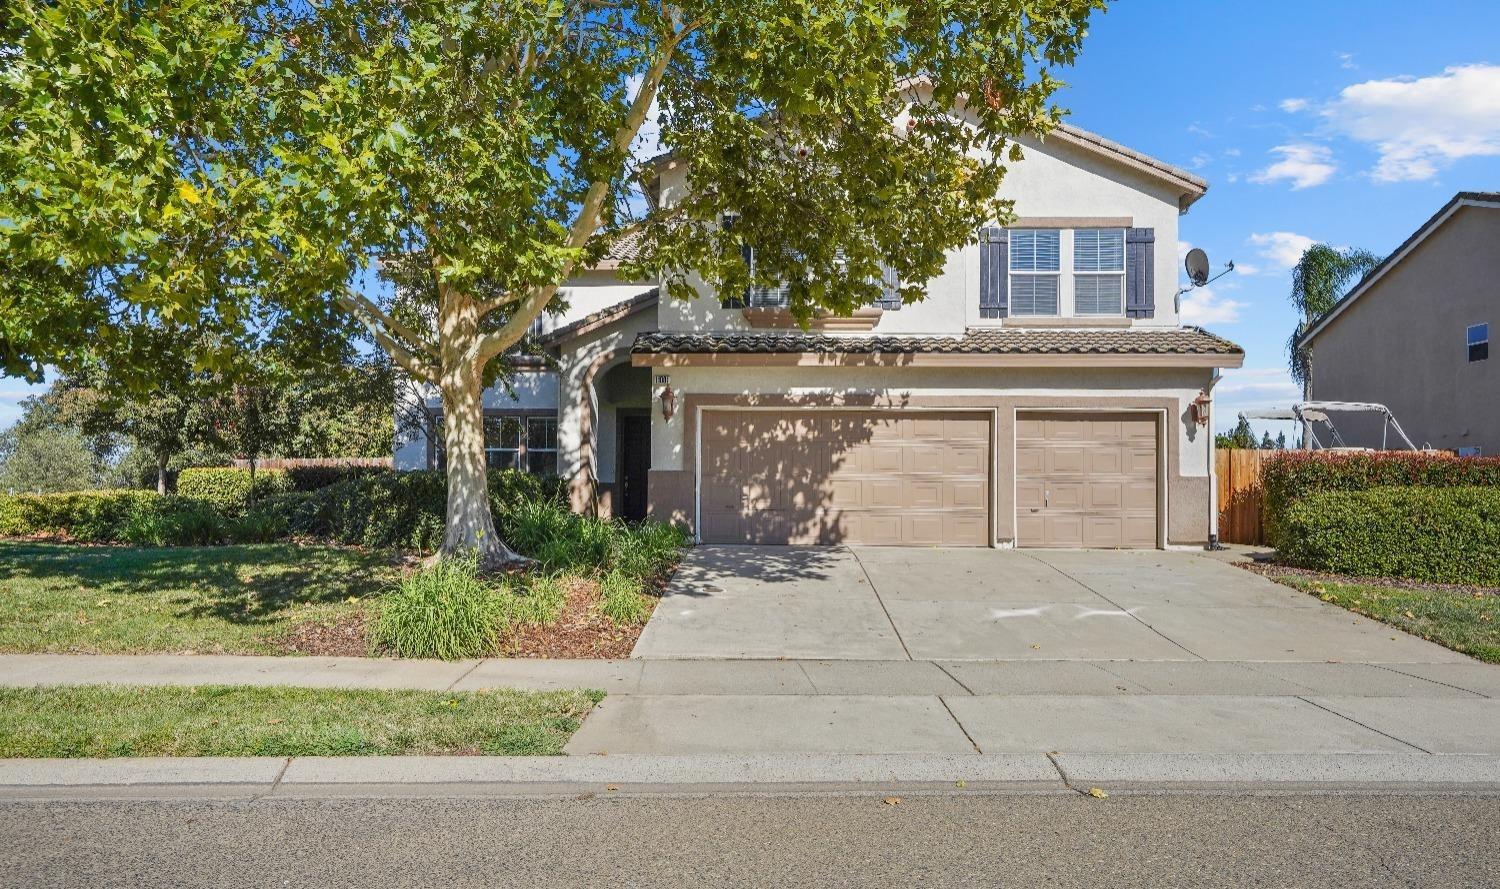 Photo of 11001 Essey Cir in Mather, CA